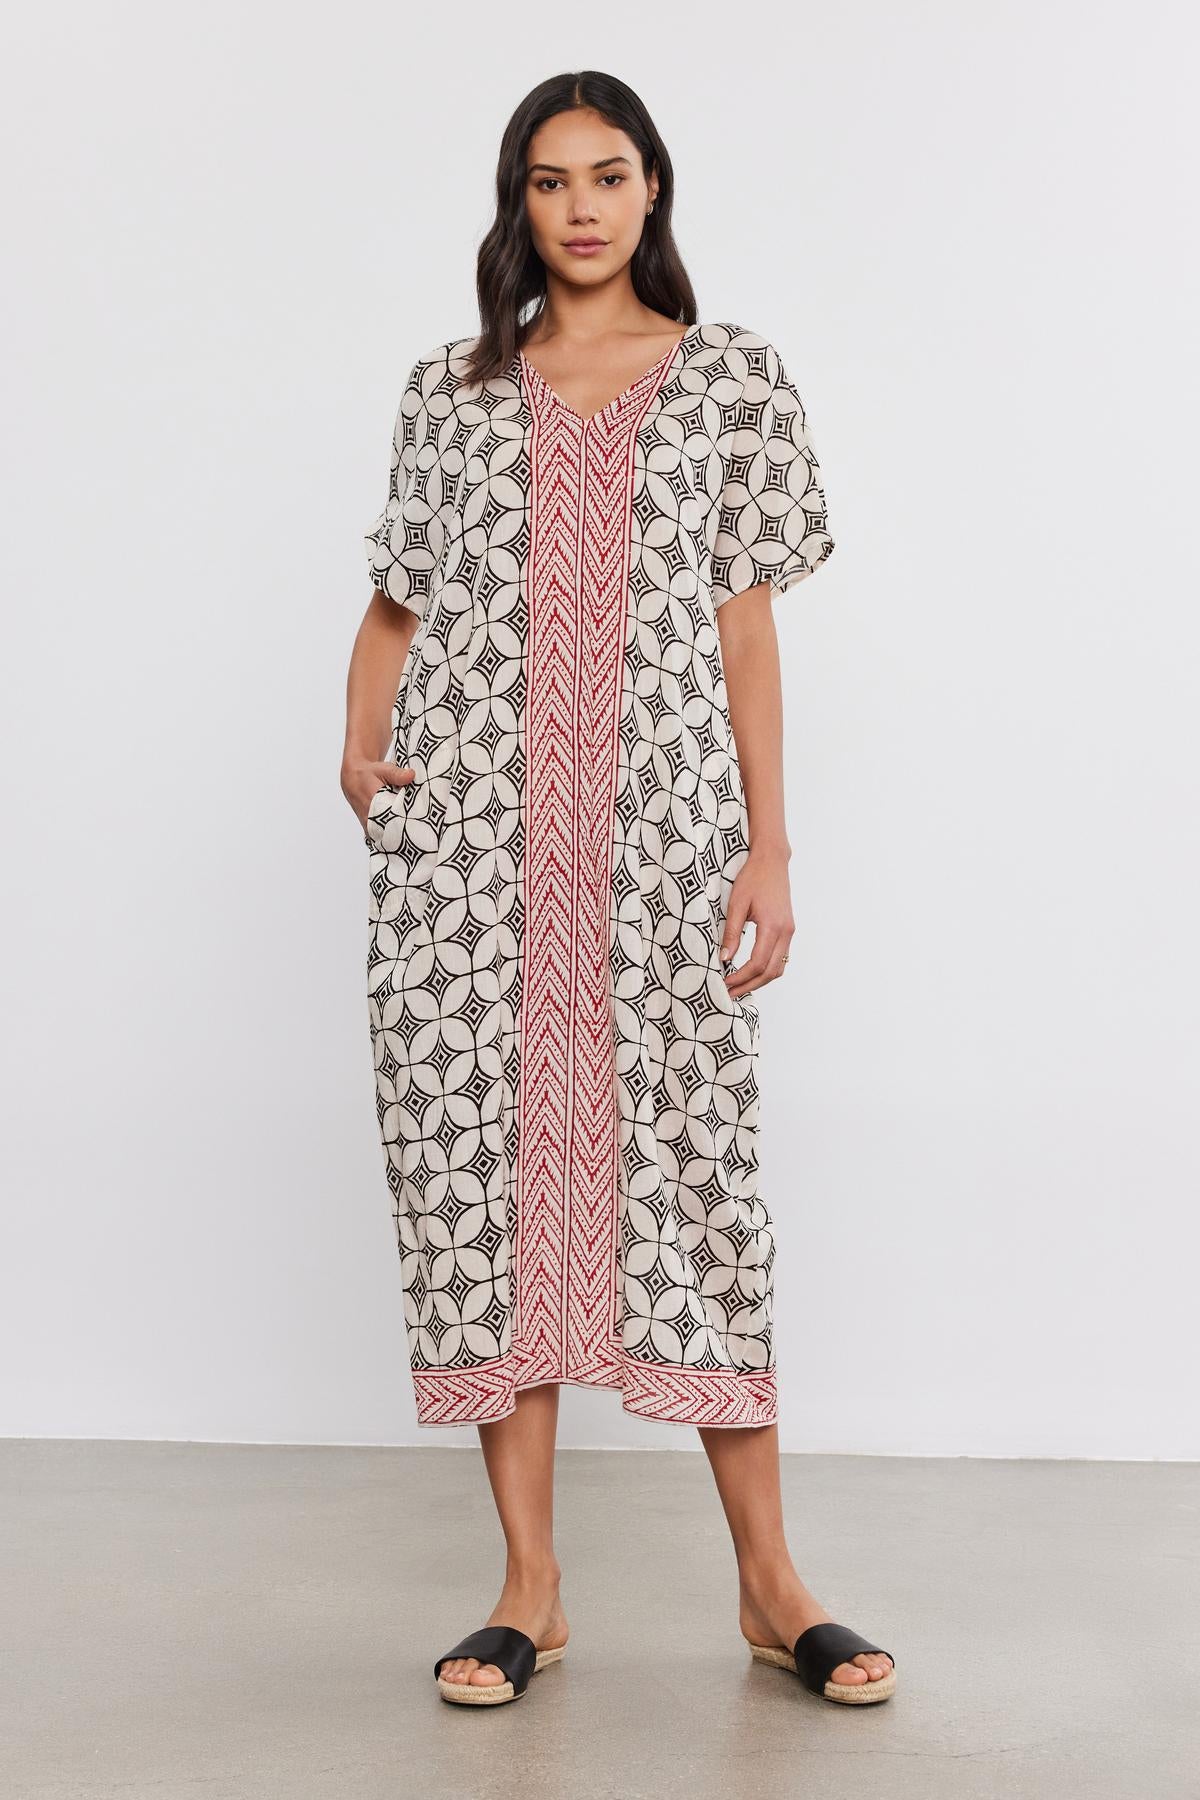 A woman stands facing the camera, wearing an ODESSA KAFTAN DRESS from Velvet by Graham & Spencer with a geometric and stripe pattern, and black sandals on a plain background.-36910025638081